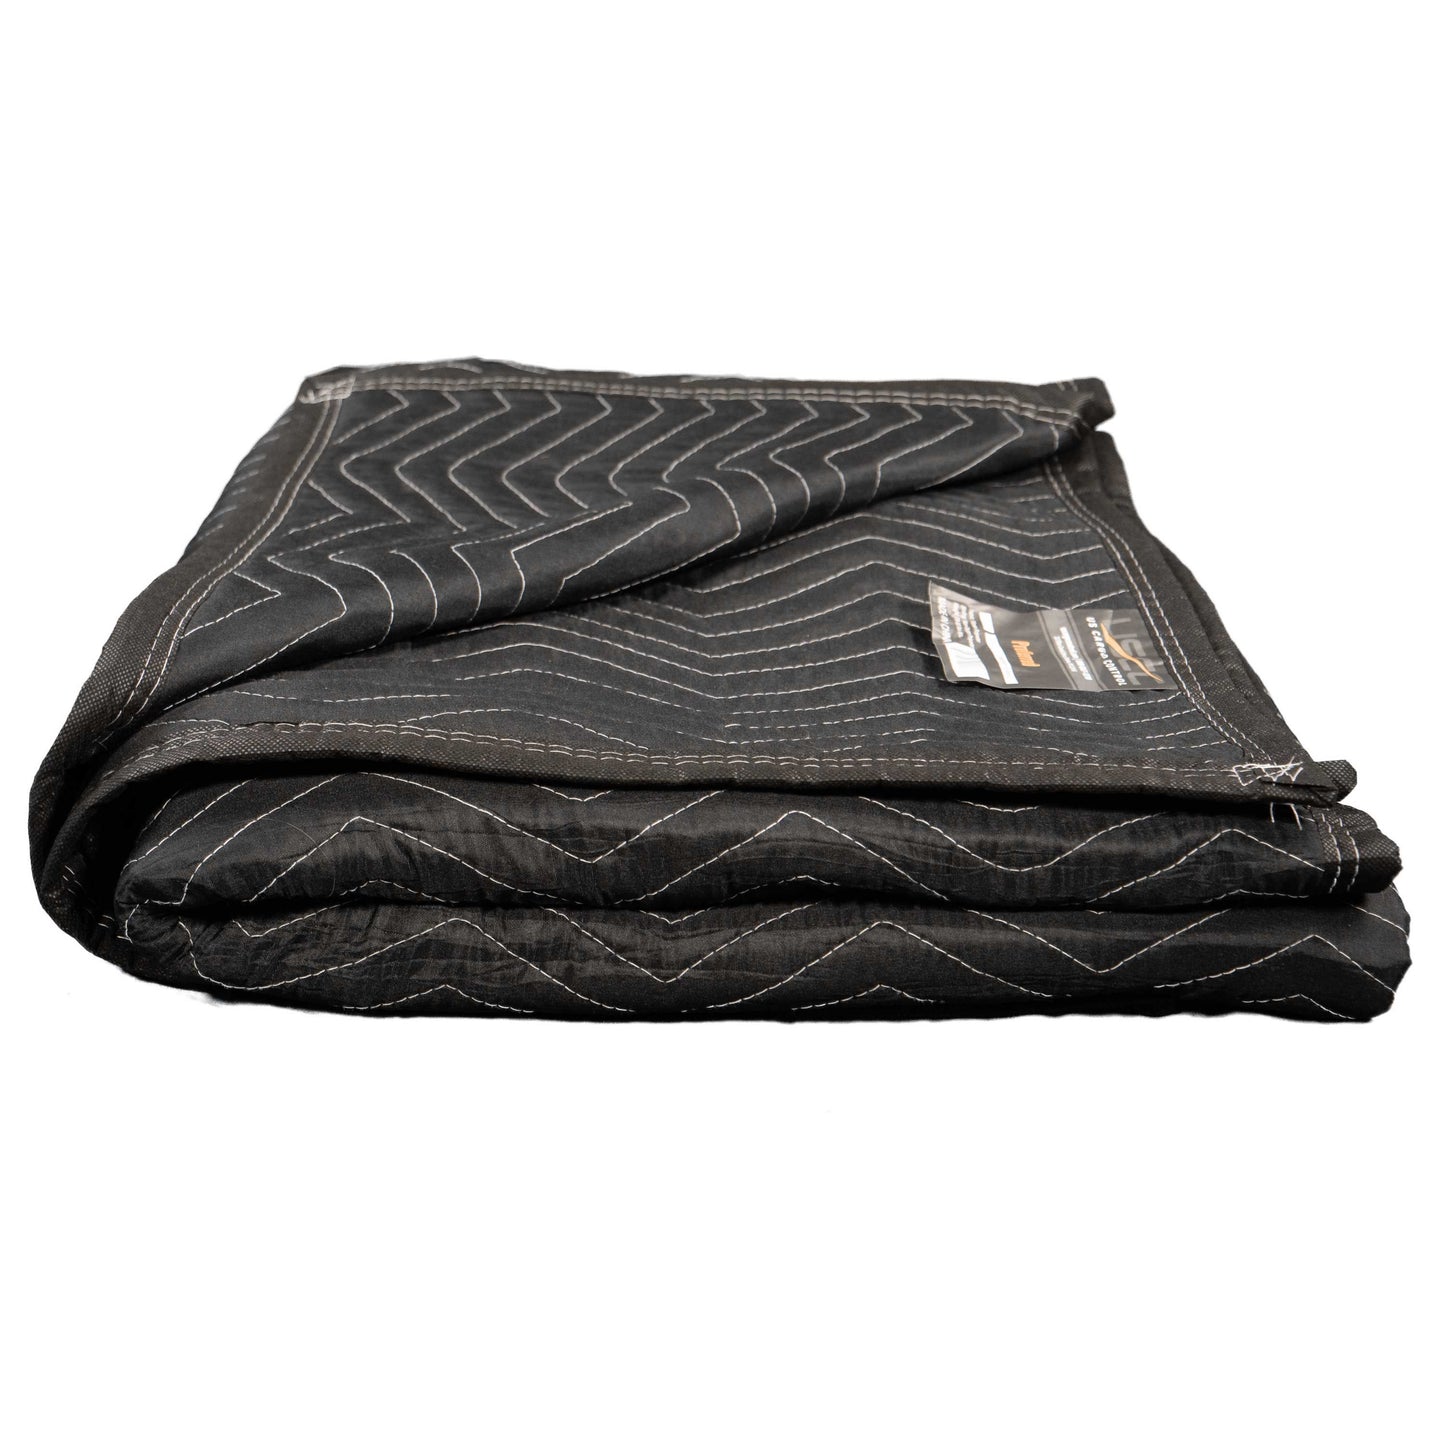 Moving Blankets - Preferred Mover 4 Pack image 2 of 11